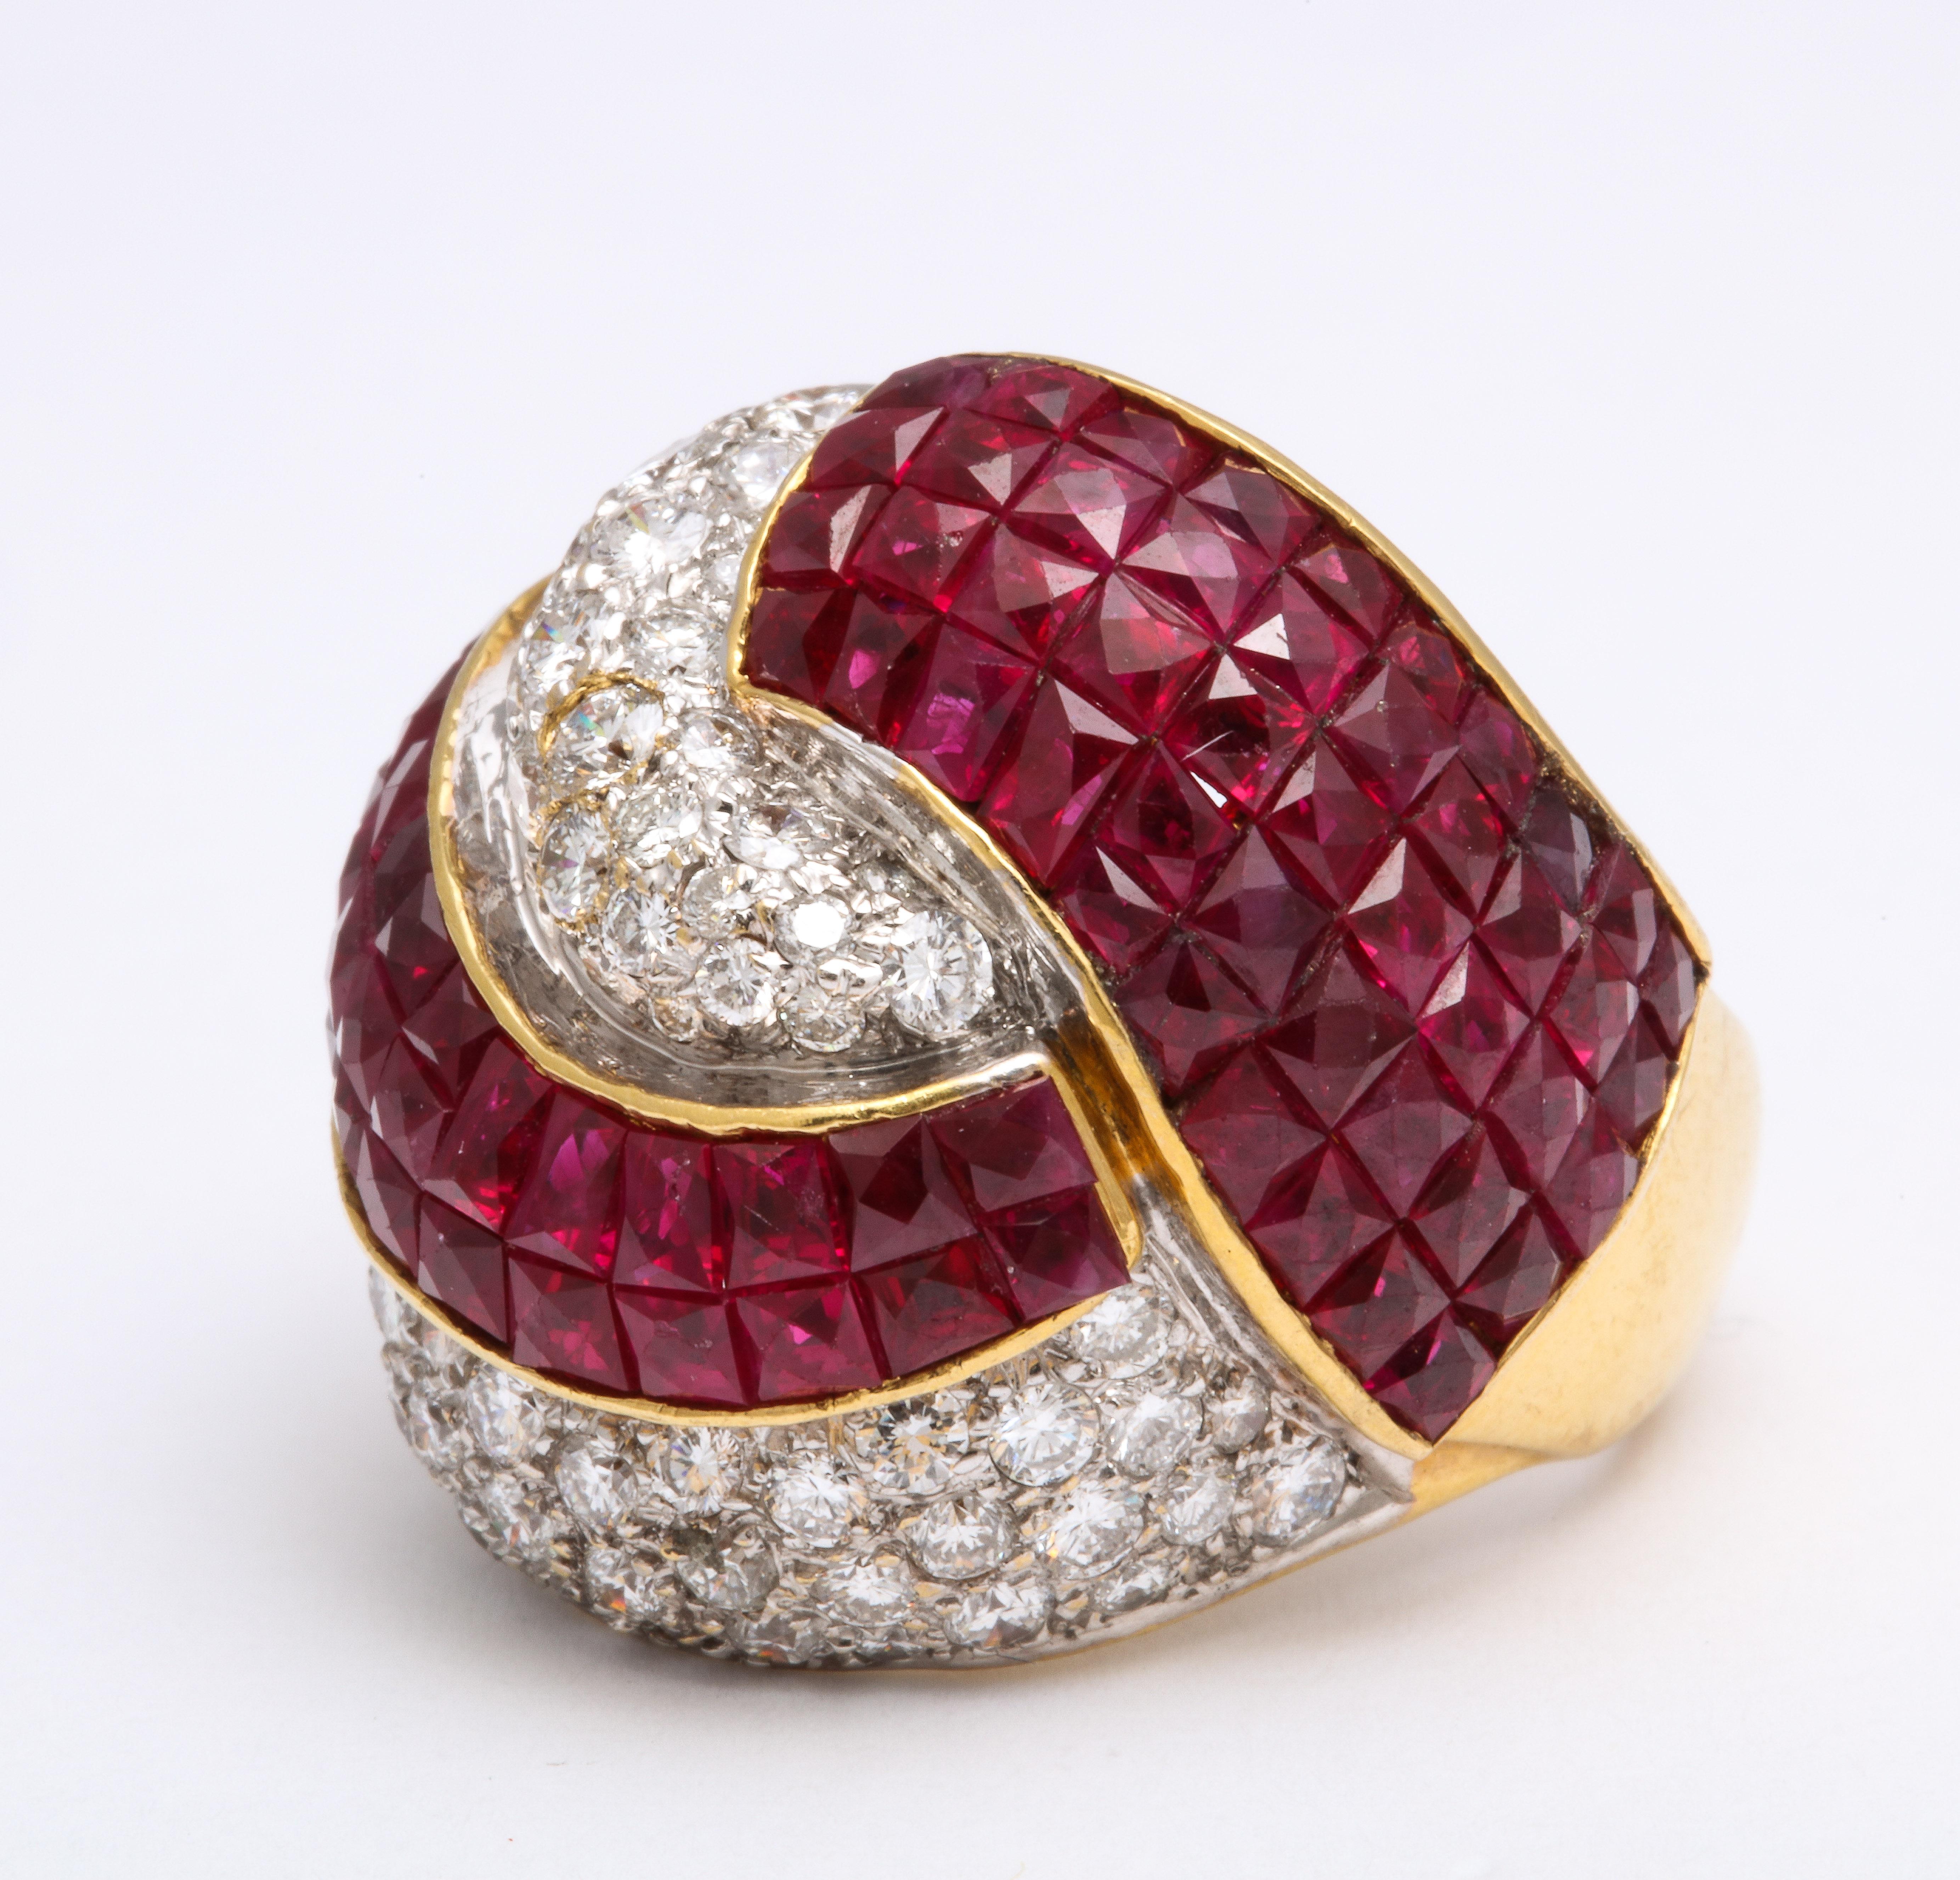 
A spectacular piece!

Mystery set Rubies swirl with approximately 2 carats of diamonds in this bombe style ring. 

Set in 18k yellow gold. 

Size 6.5+